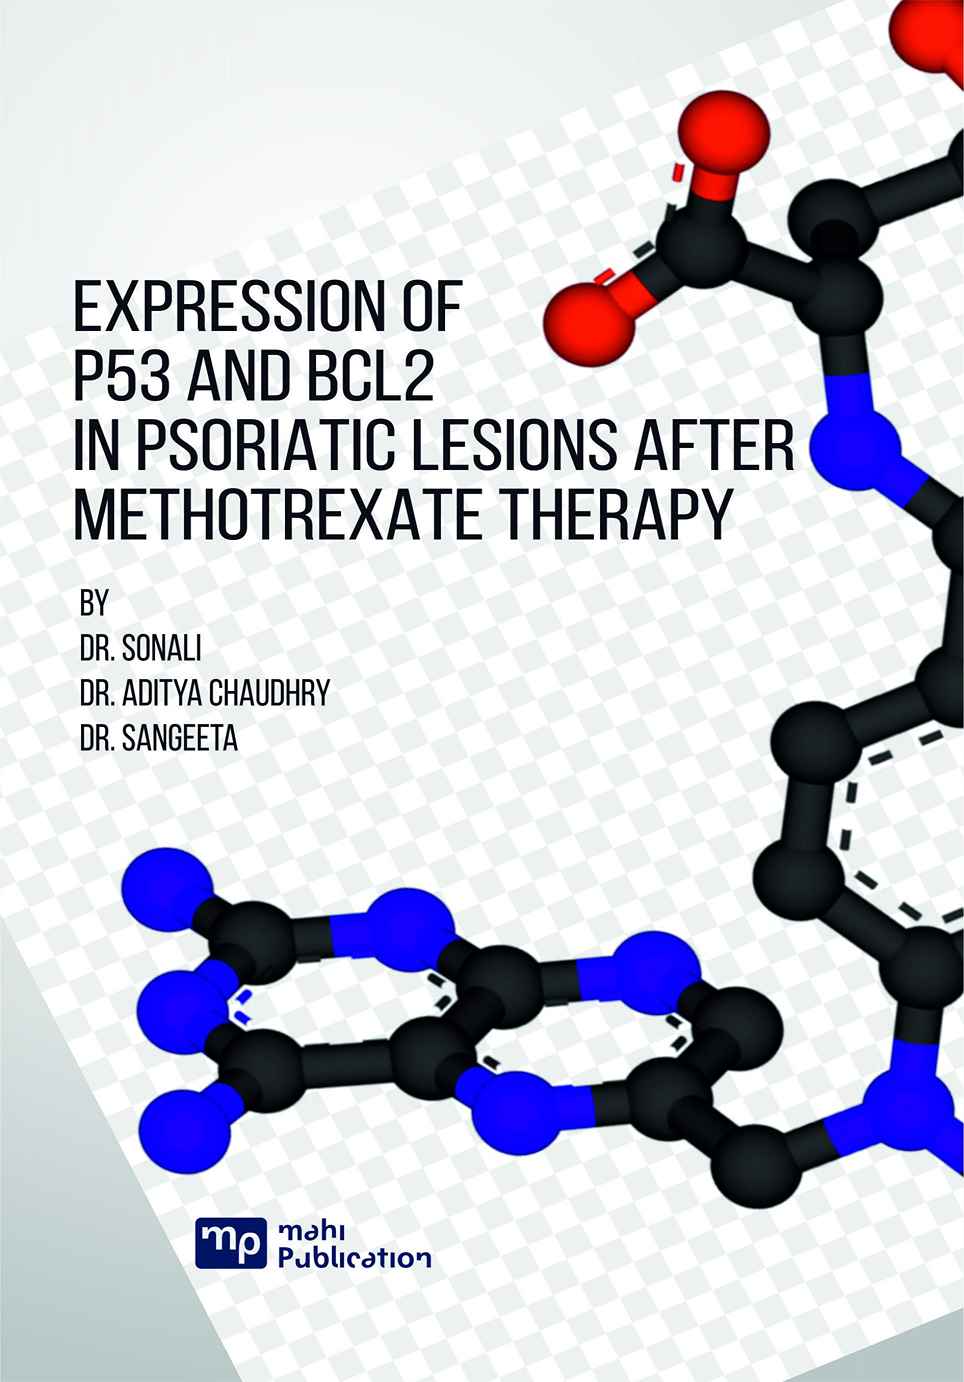 Expression of P53 and BCL2 In Psoriatic Lesions After Methotrexate Therapy